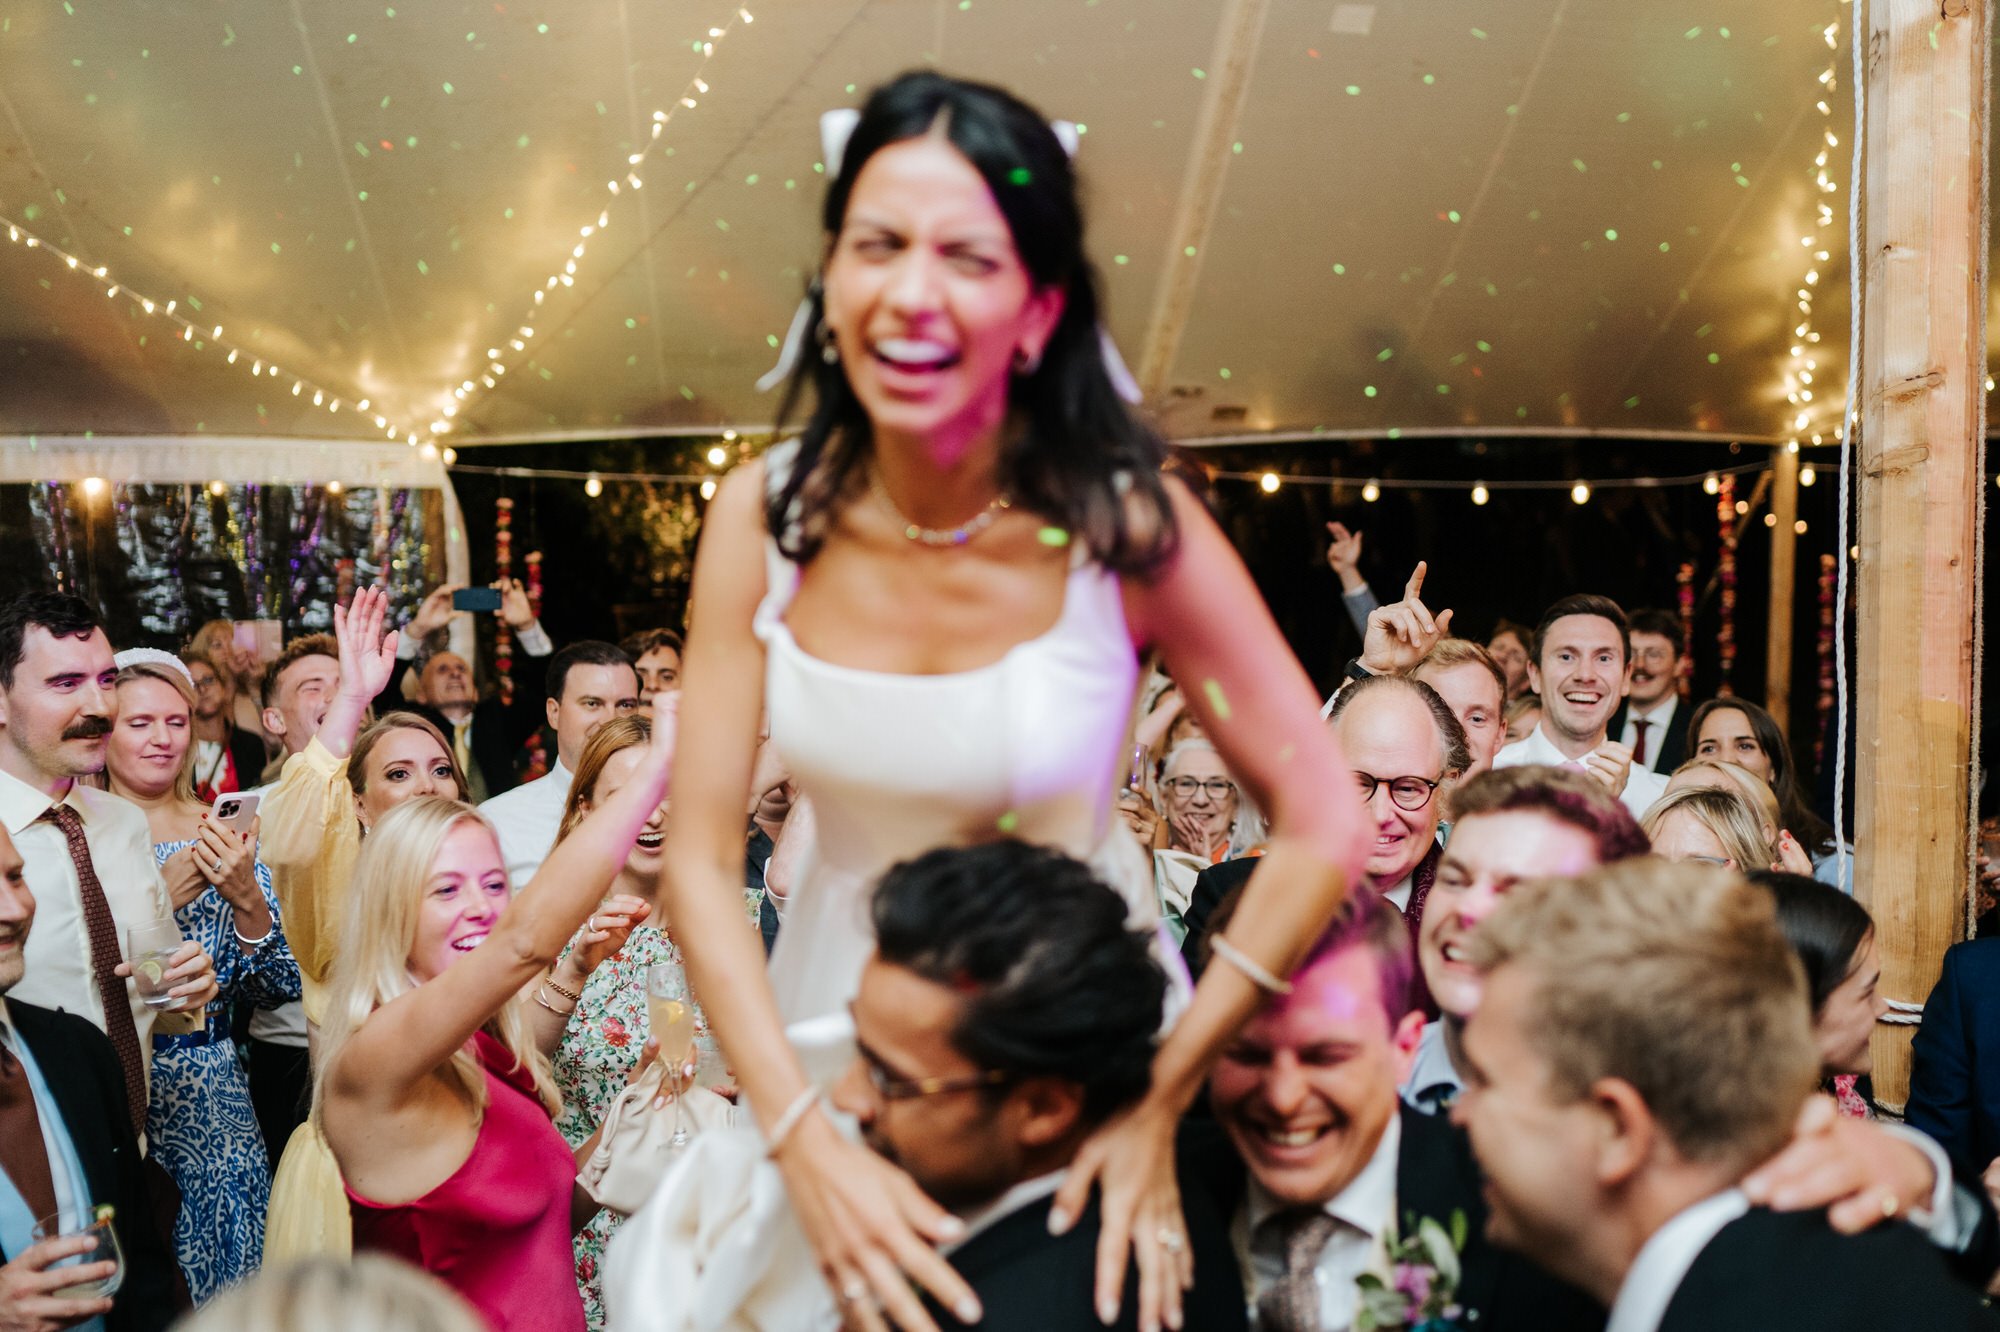 front and centre bride, out of focus, is lighted up and laughs while her guests smile in the background